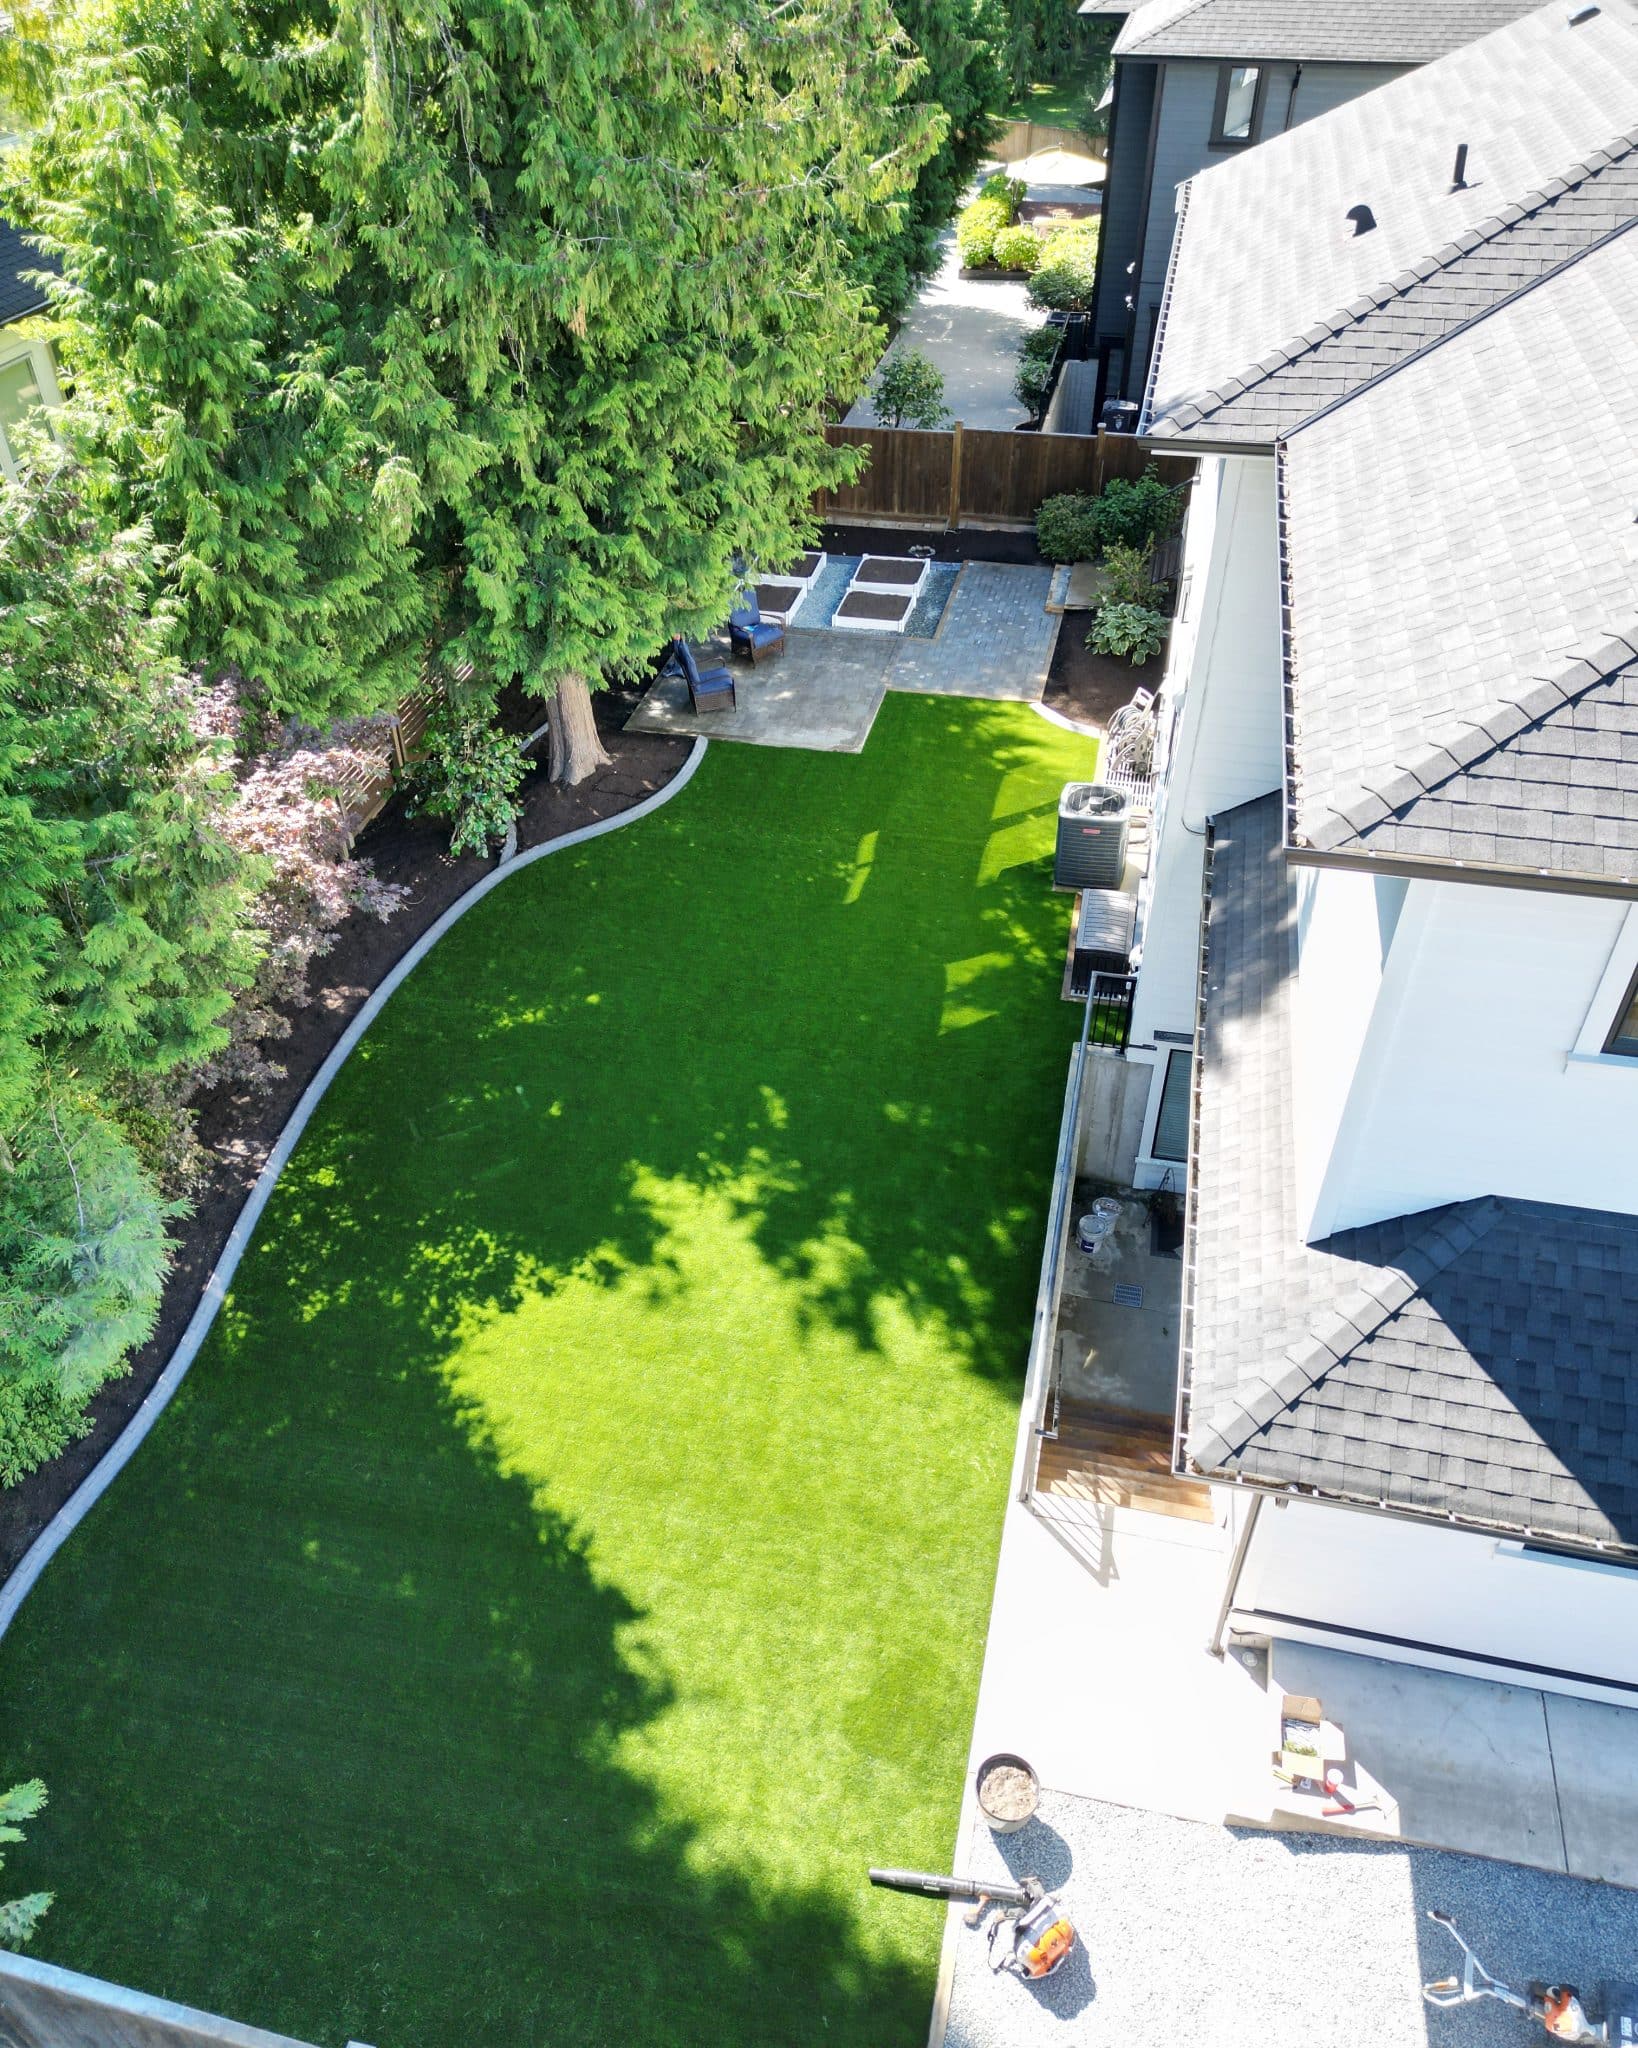 An aerial view of a backyard with artificial grass.